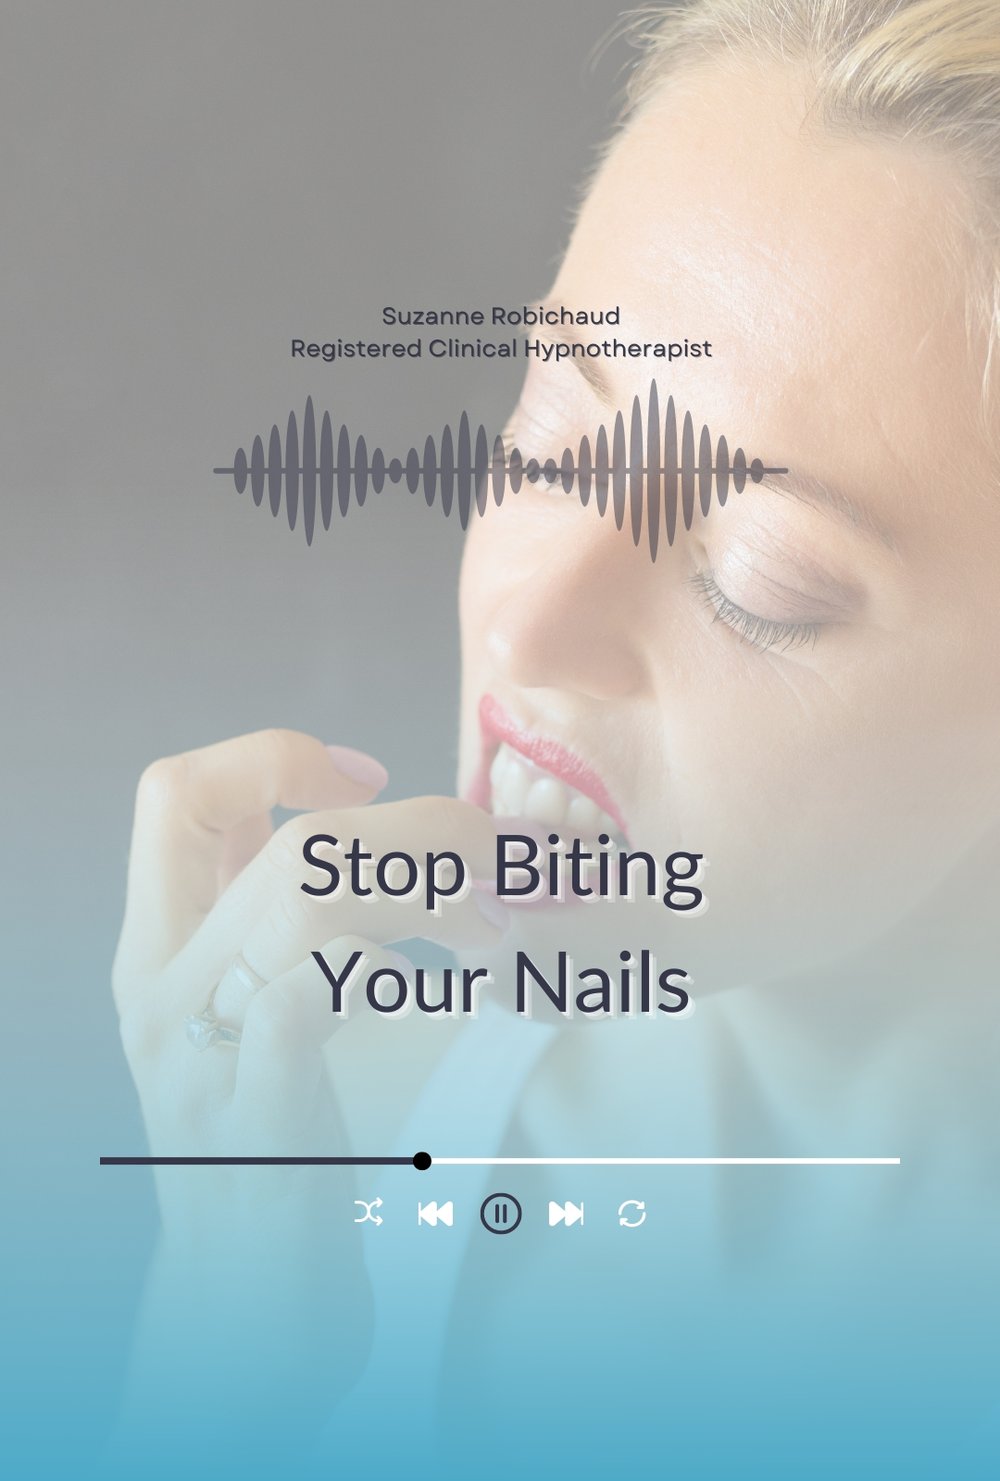 Hypnosis to Stop Biting Your Nails – Break The Habit Permanently  Length:26min